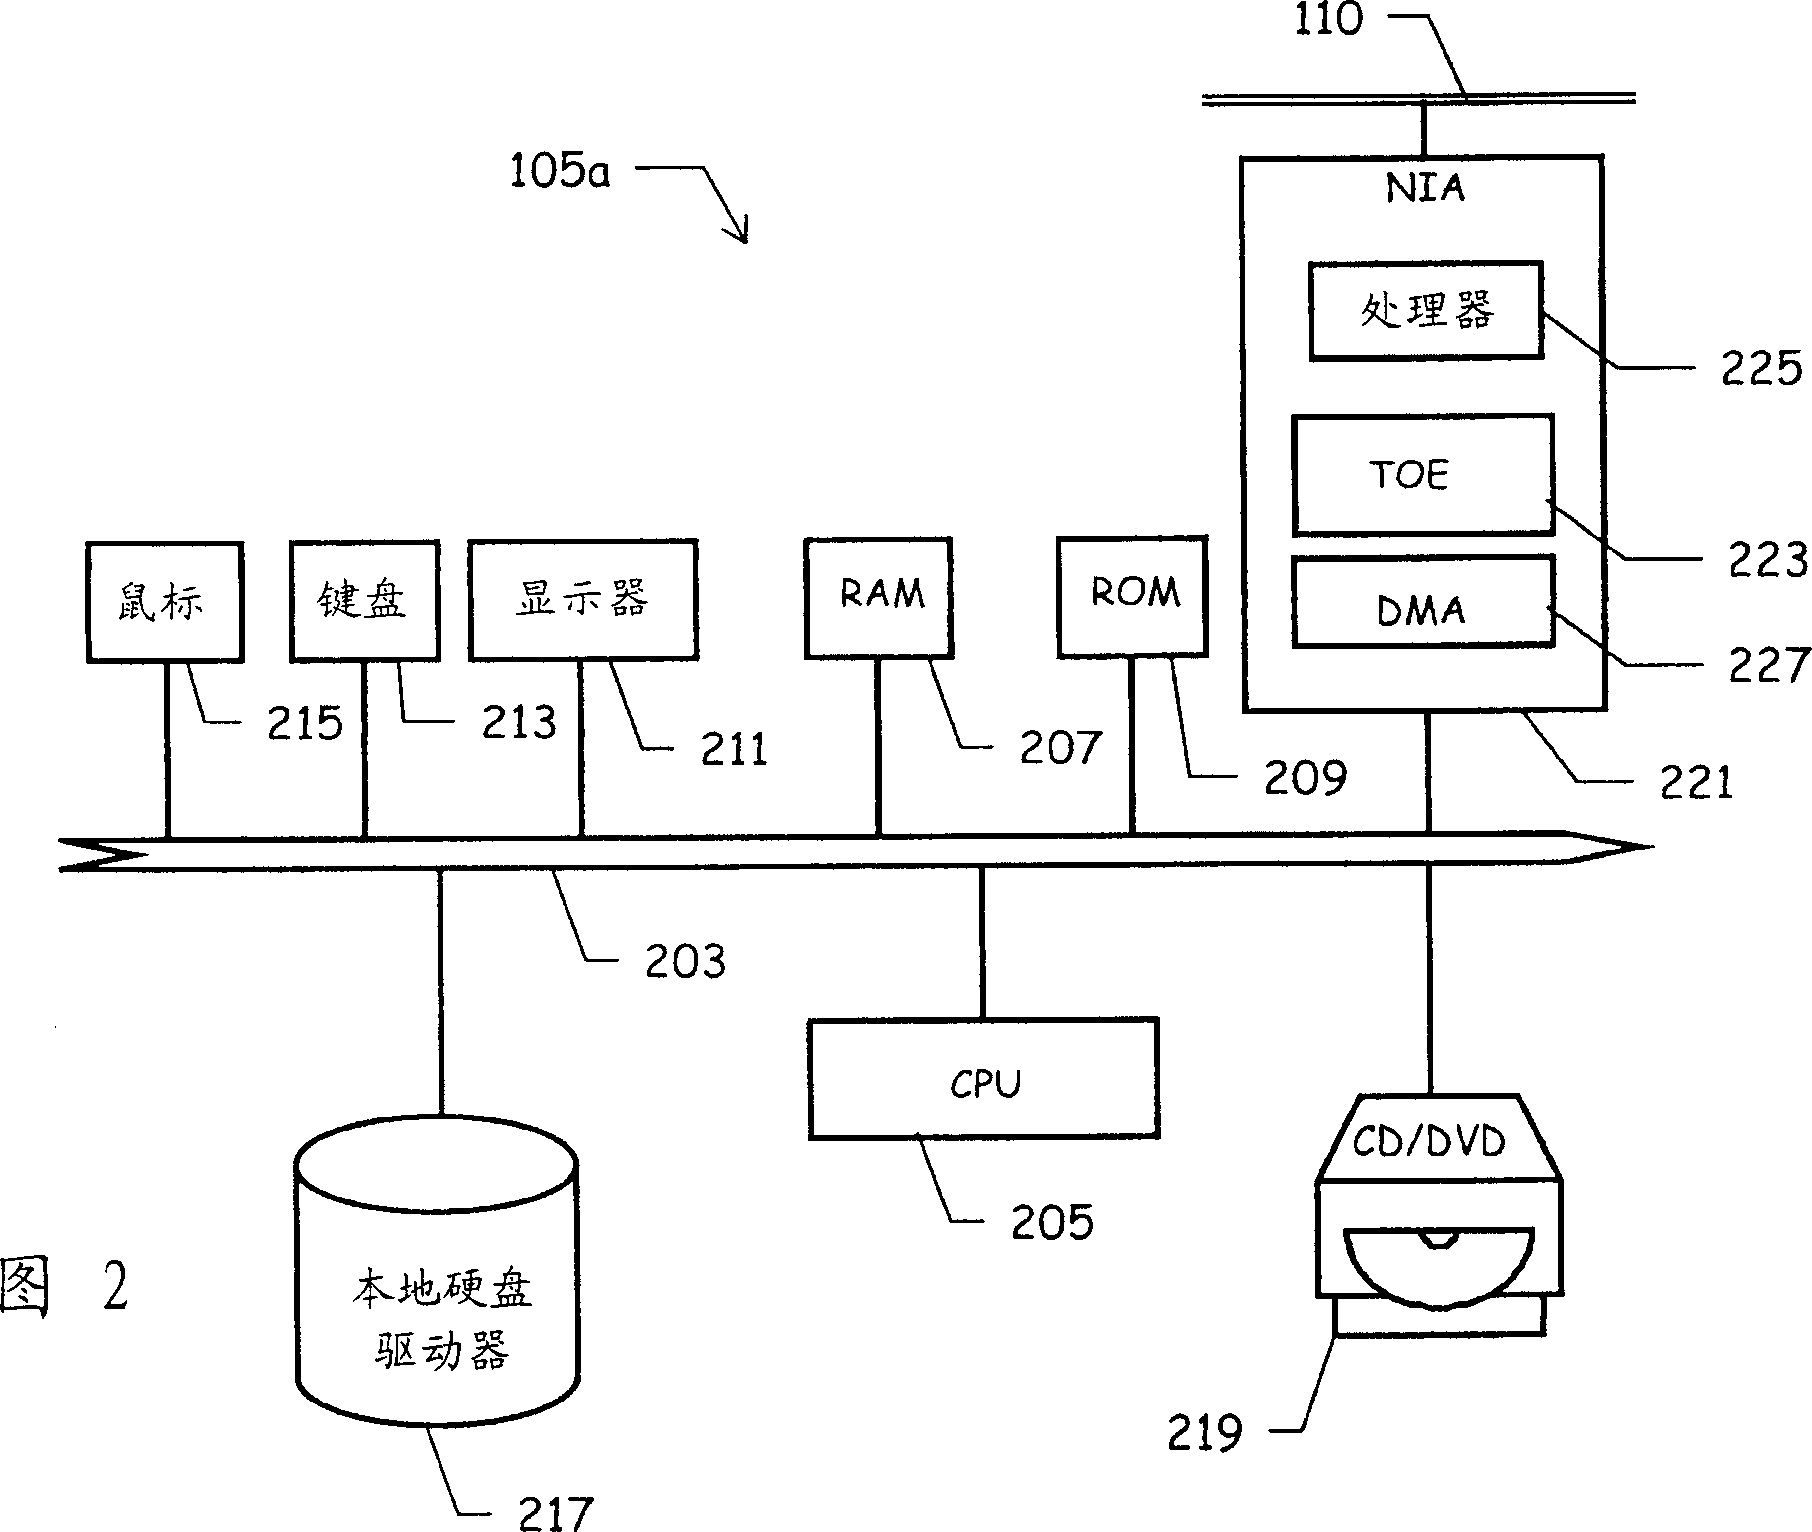 Method of offloading iscsi tcp/ip processing from a host processing unit, and related iscsi tcp/ip offload engine